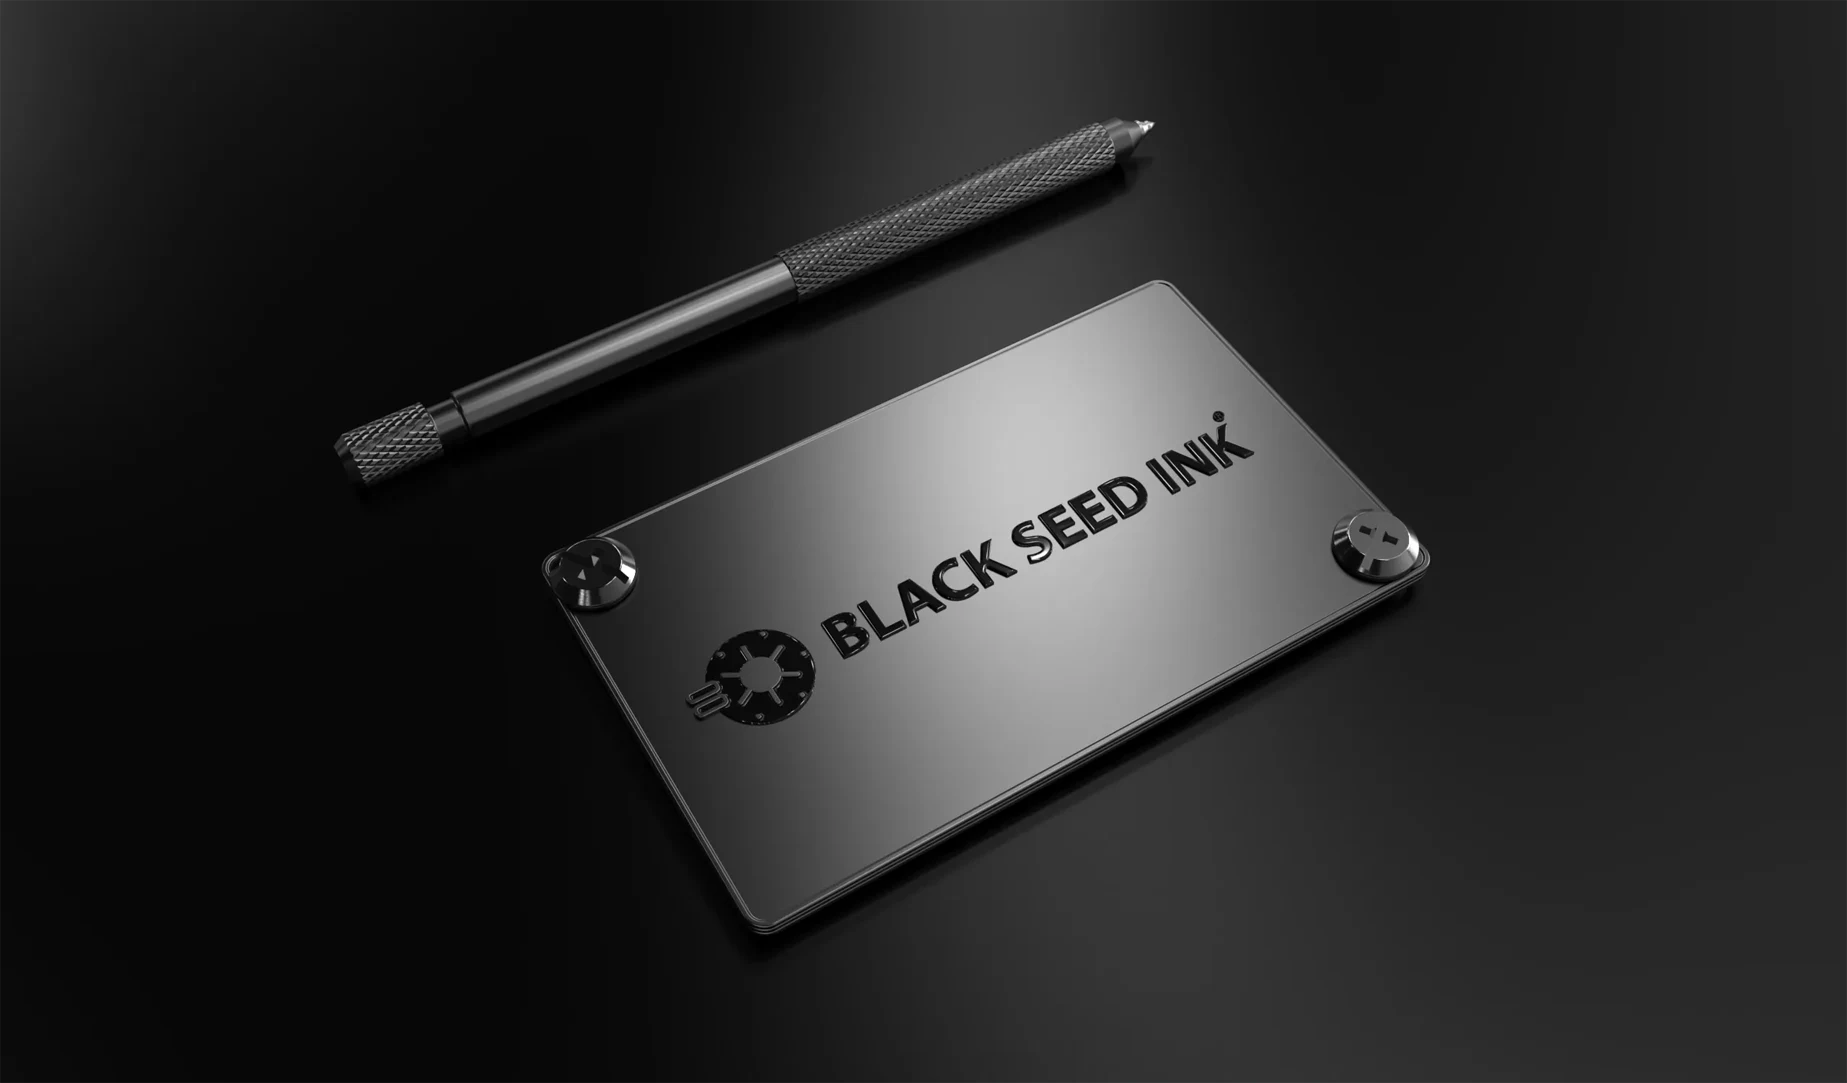 A close-up image of a steel plate with engraved alphanumeric characters. This steel plate serves as a backup for a cryptocurrency seed wallet, which is used to store digital assets securely. The engraved characters on the plate represent a unique set of words that act as a recovery phrase for the wallet. The steel plate provides a durable and tamper-proof backup solution for protecting the cryptocurrency funds.